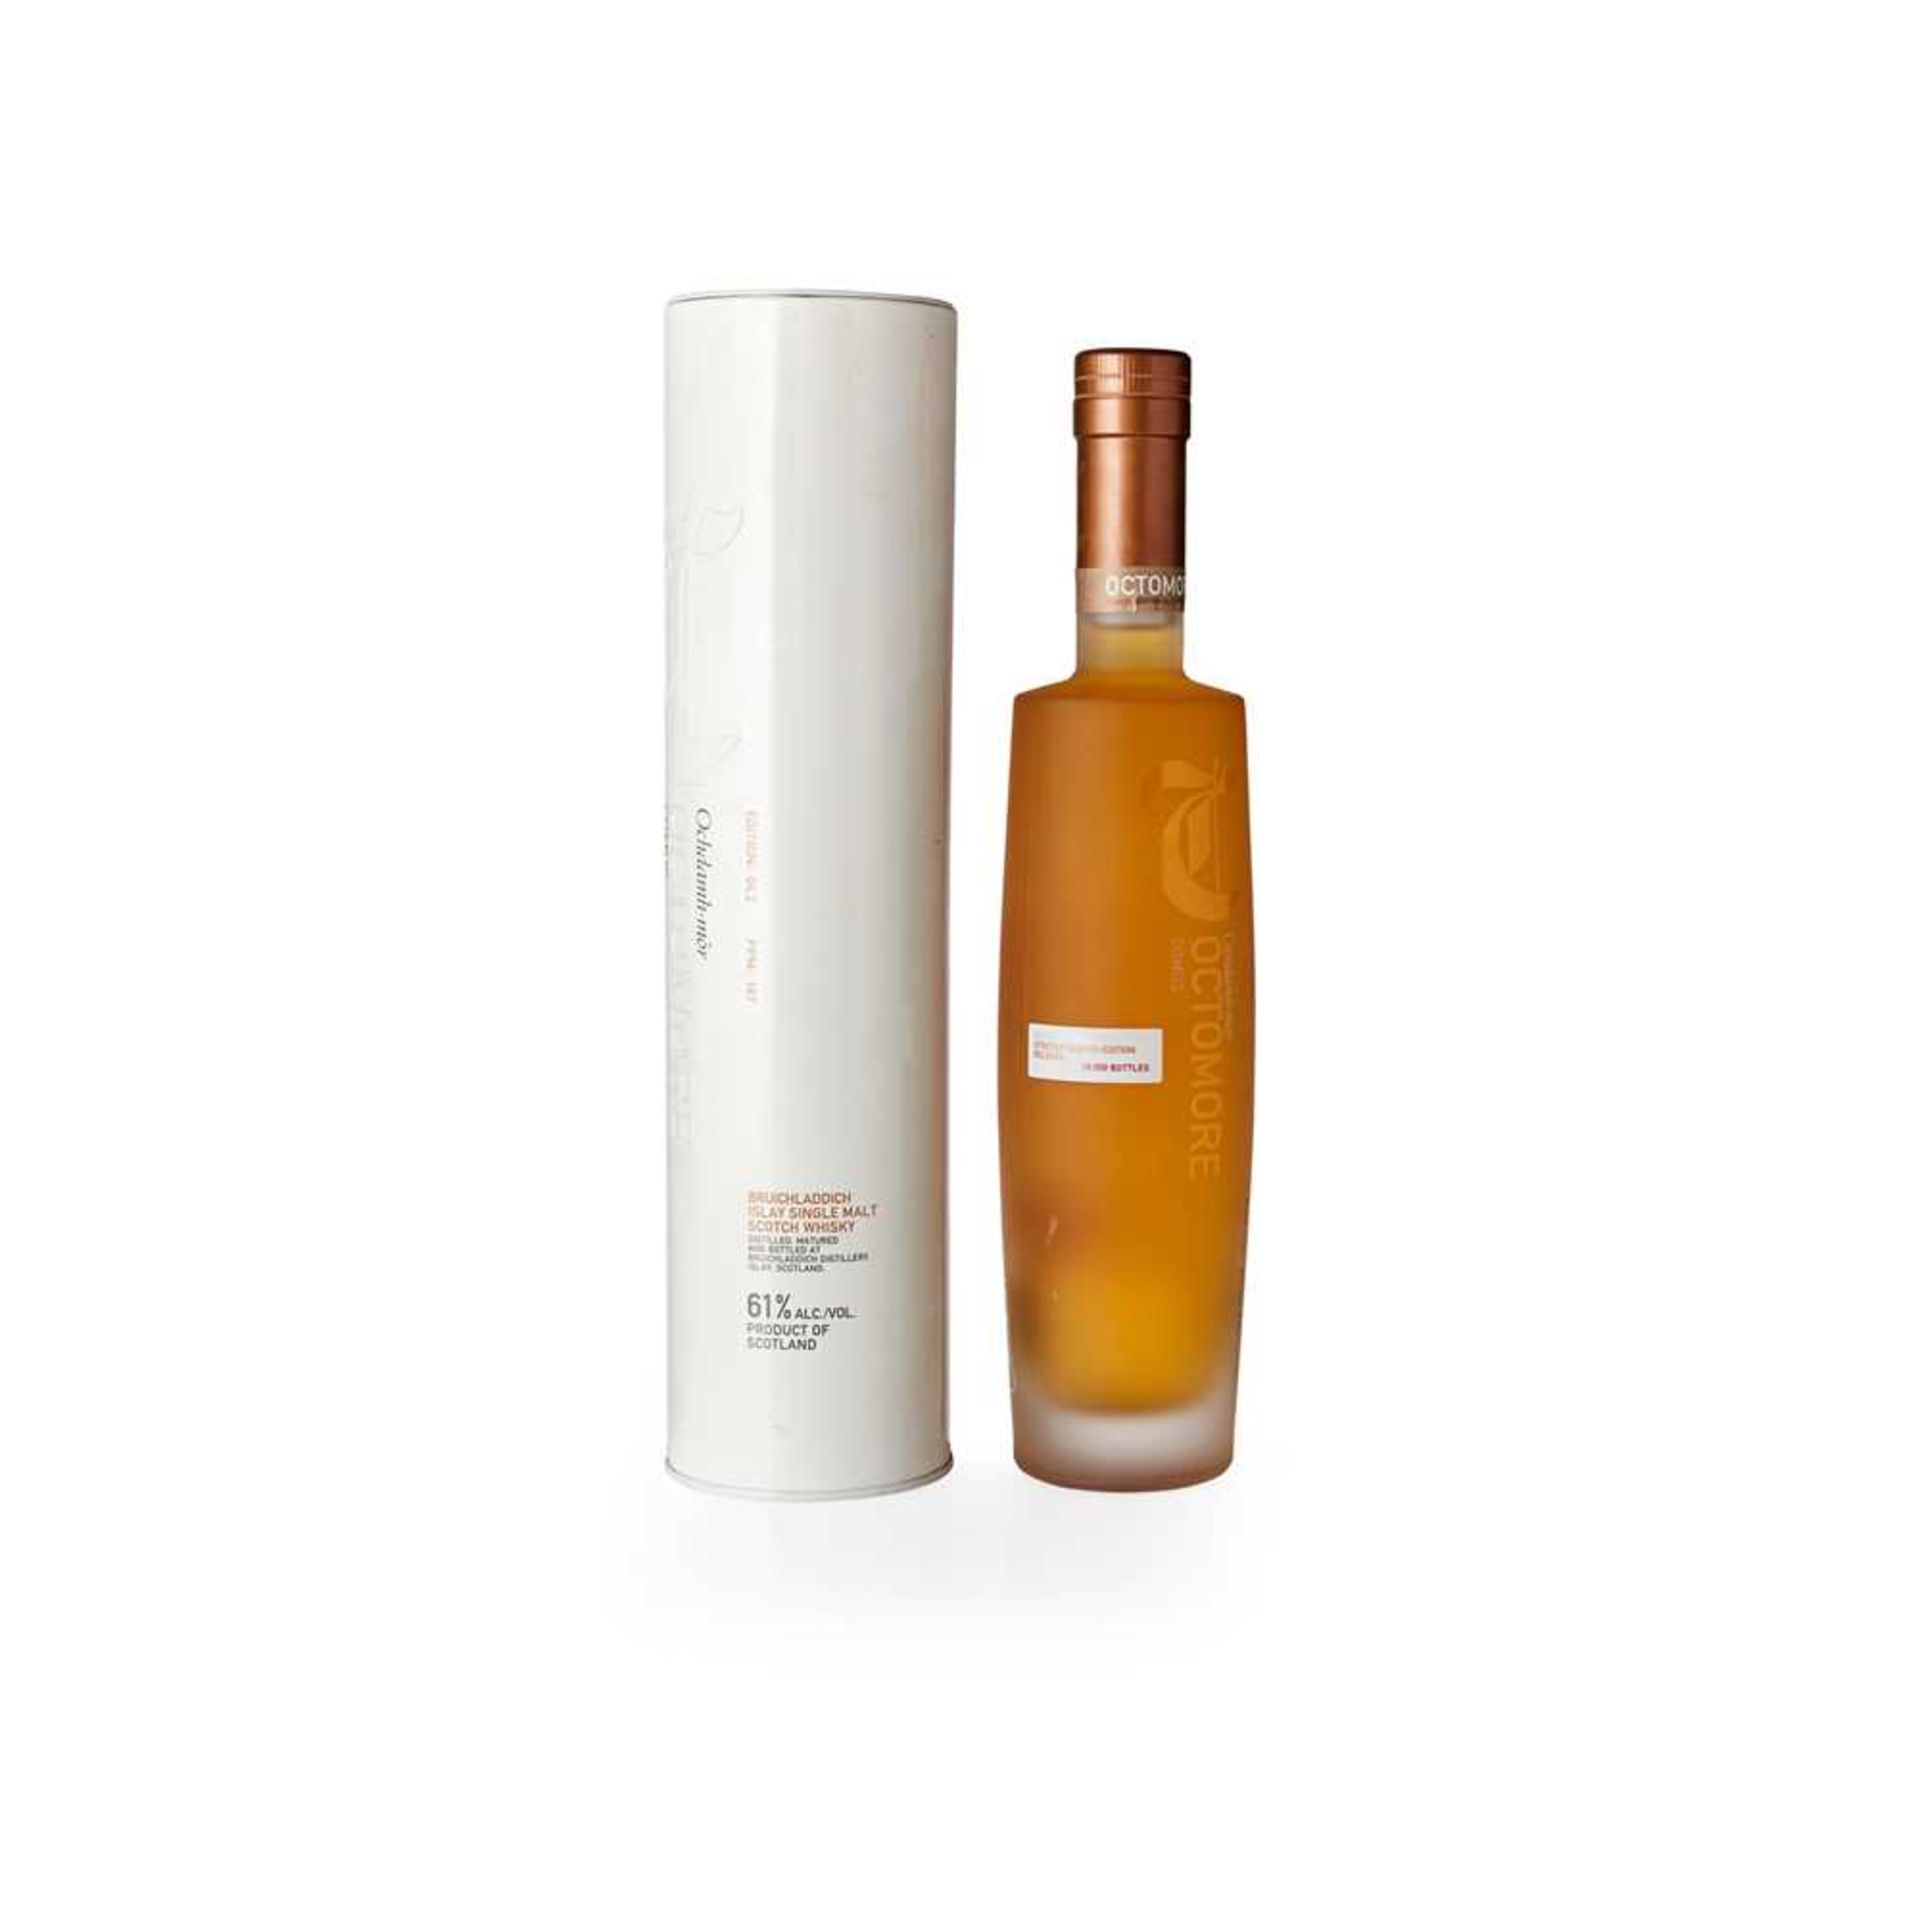 OCTOMORE 4.2 5 YEAR OLD COMUS - Image 3 of 3